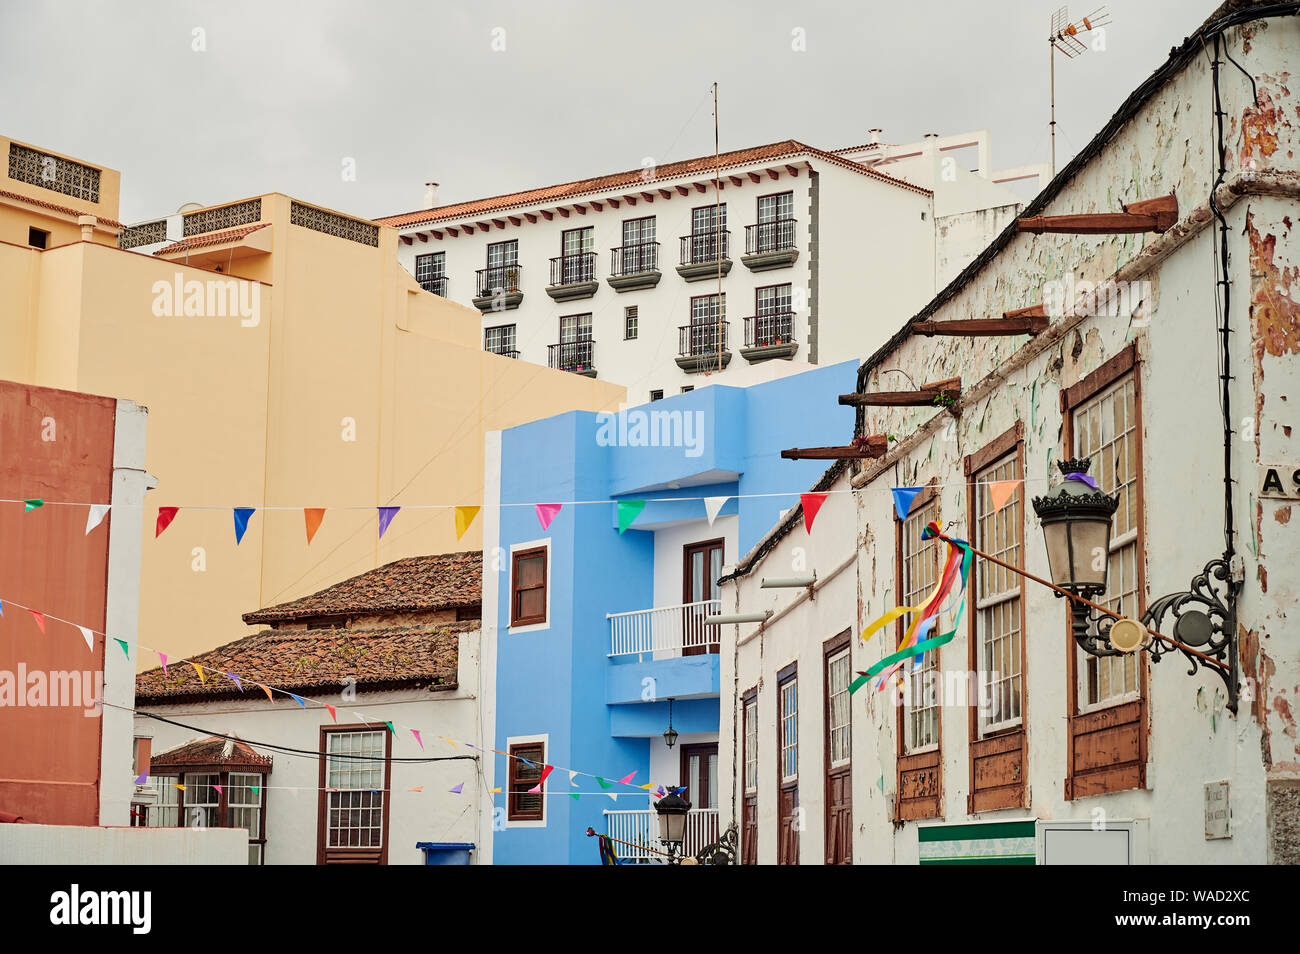 Simple exterior of colorful houses with tiled roofs and balconies on authentic street decorated with flag garlands in Tenerife, Spain Stock Photo